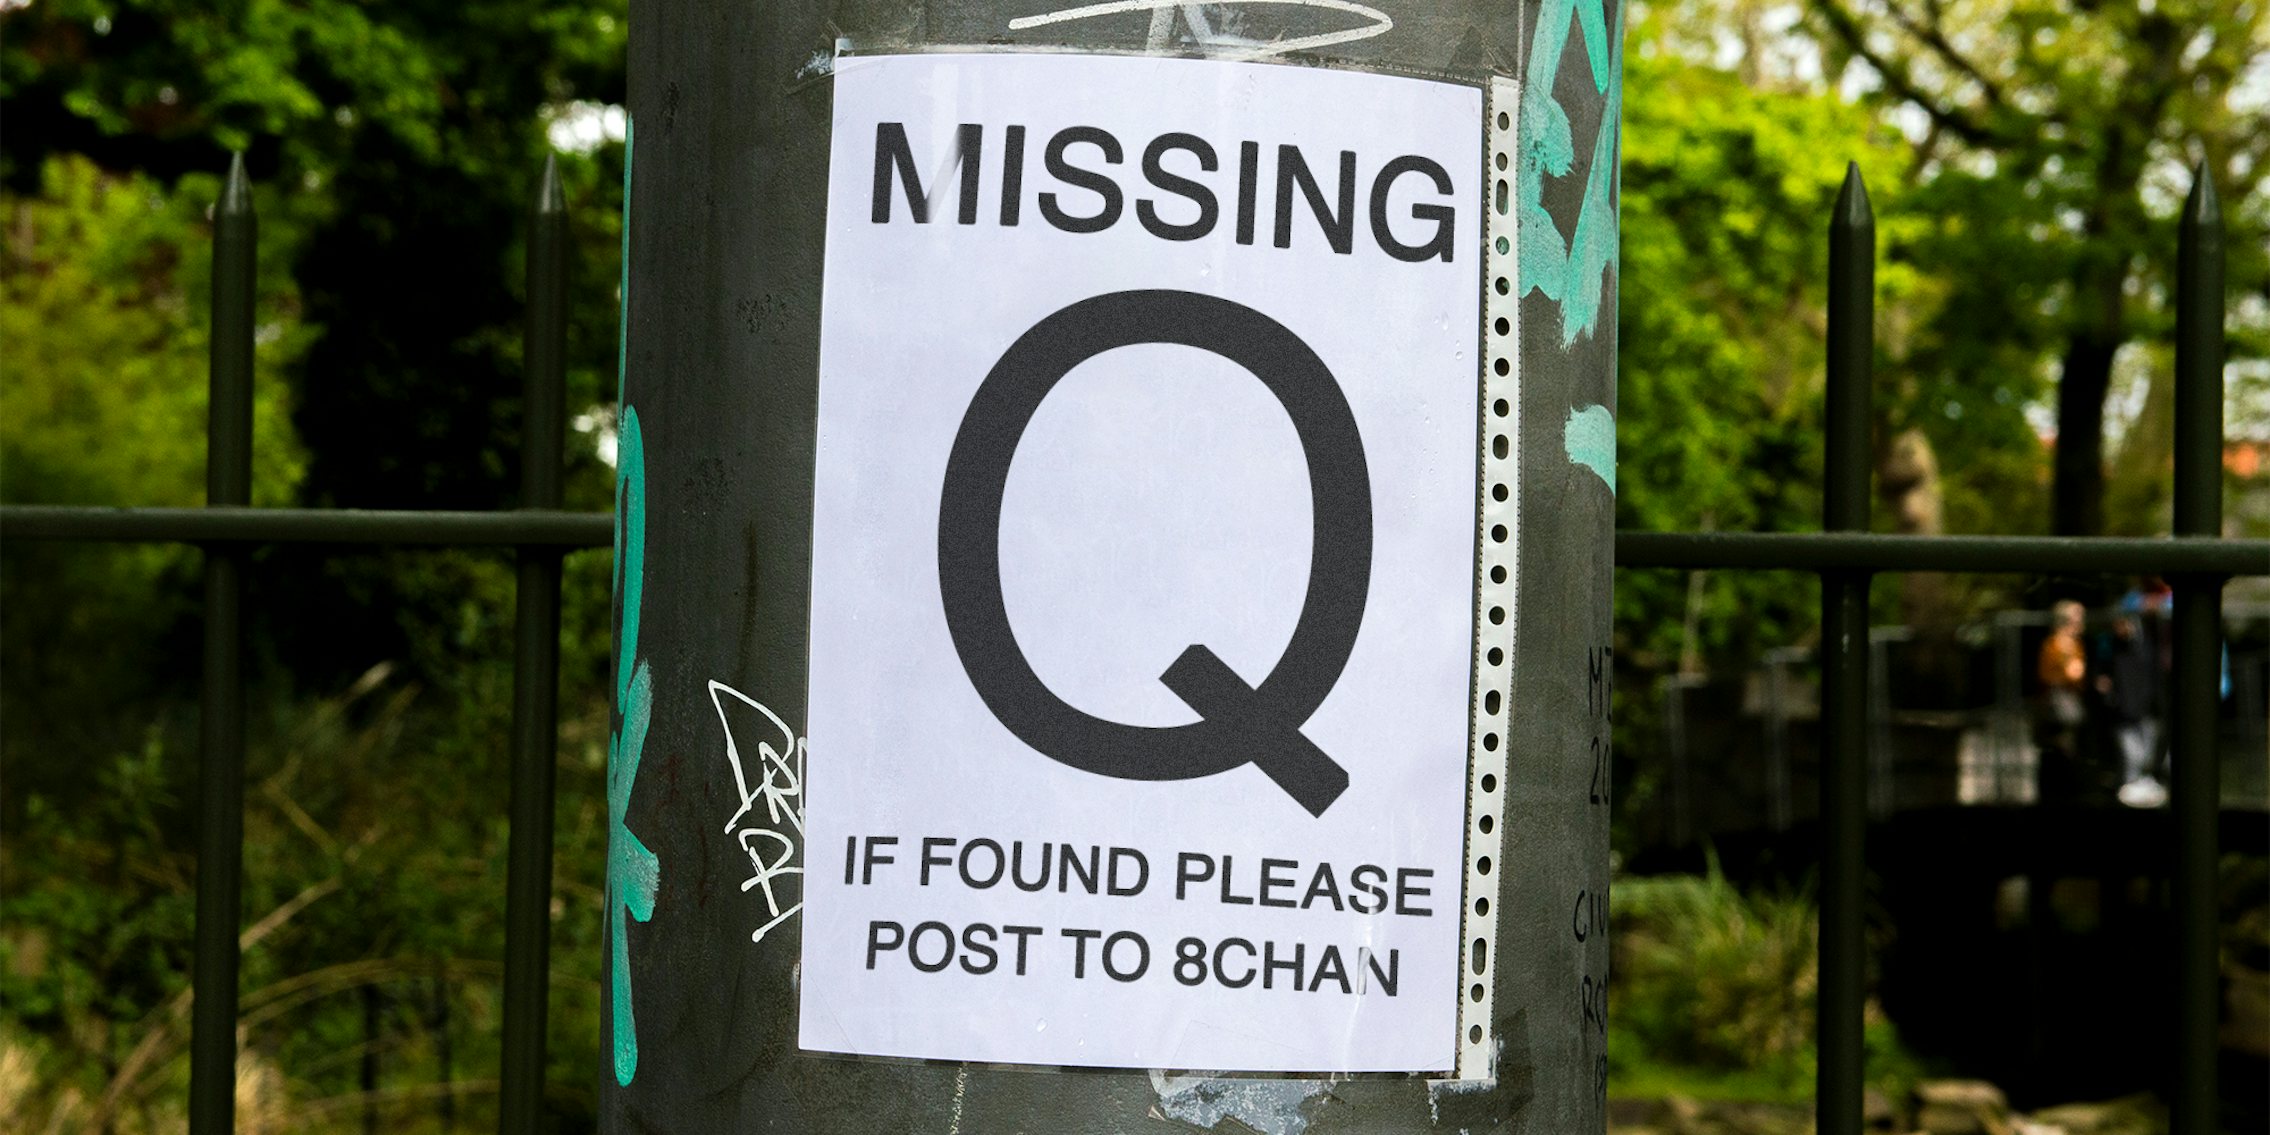 missing Q sign on post 'if found please post to chan'